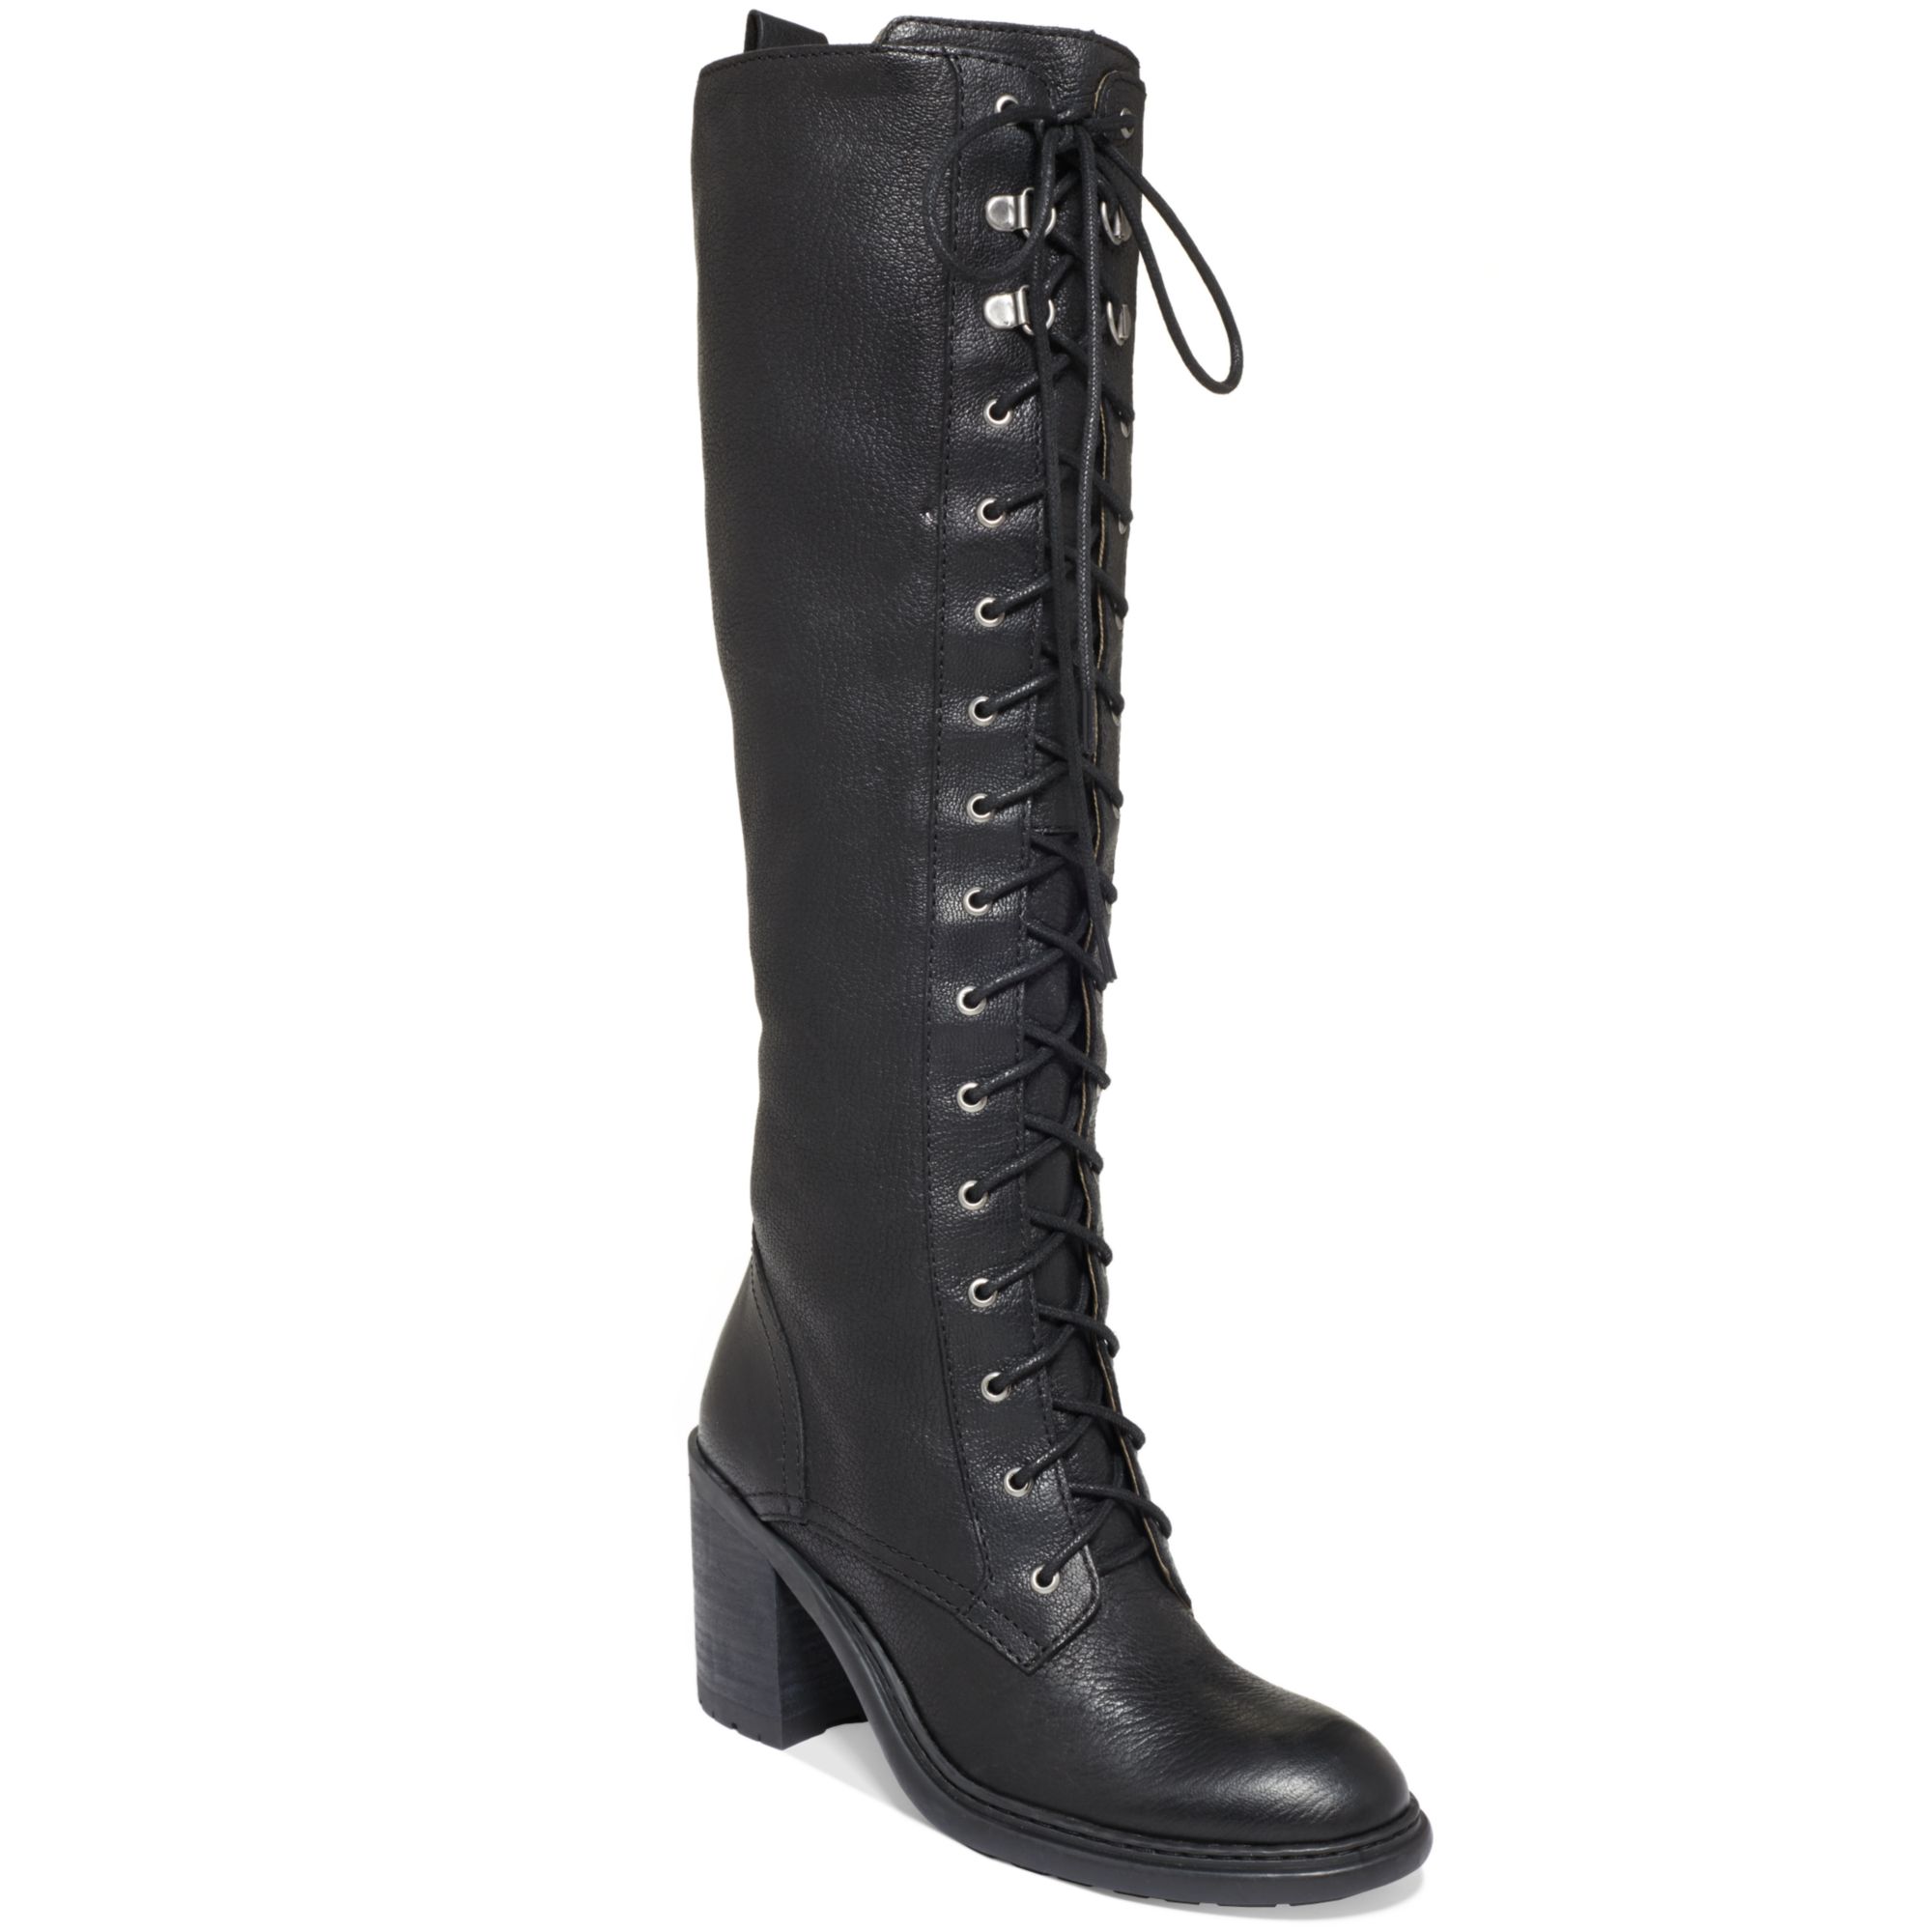 Nine West Lory Tall Laceup Combat Boots in Black - Lyst